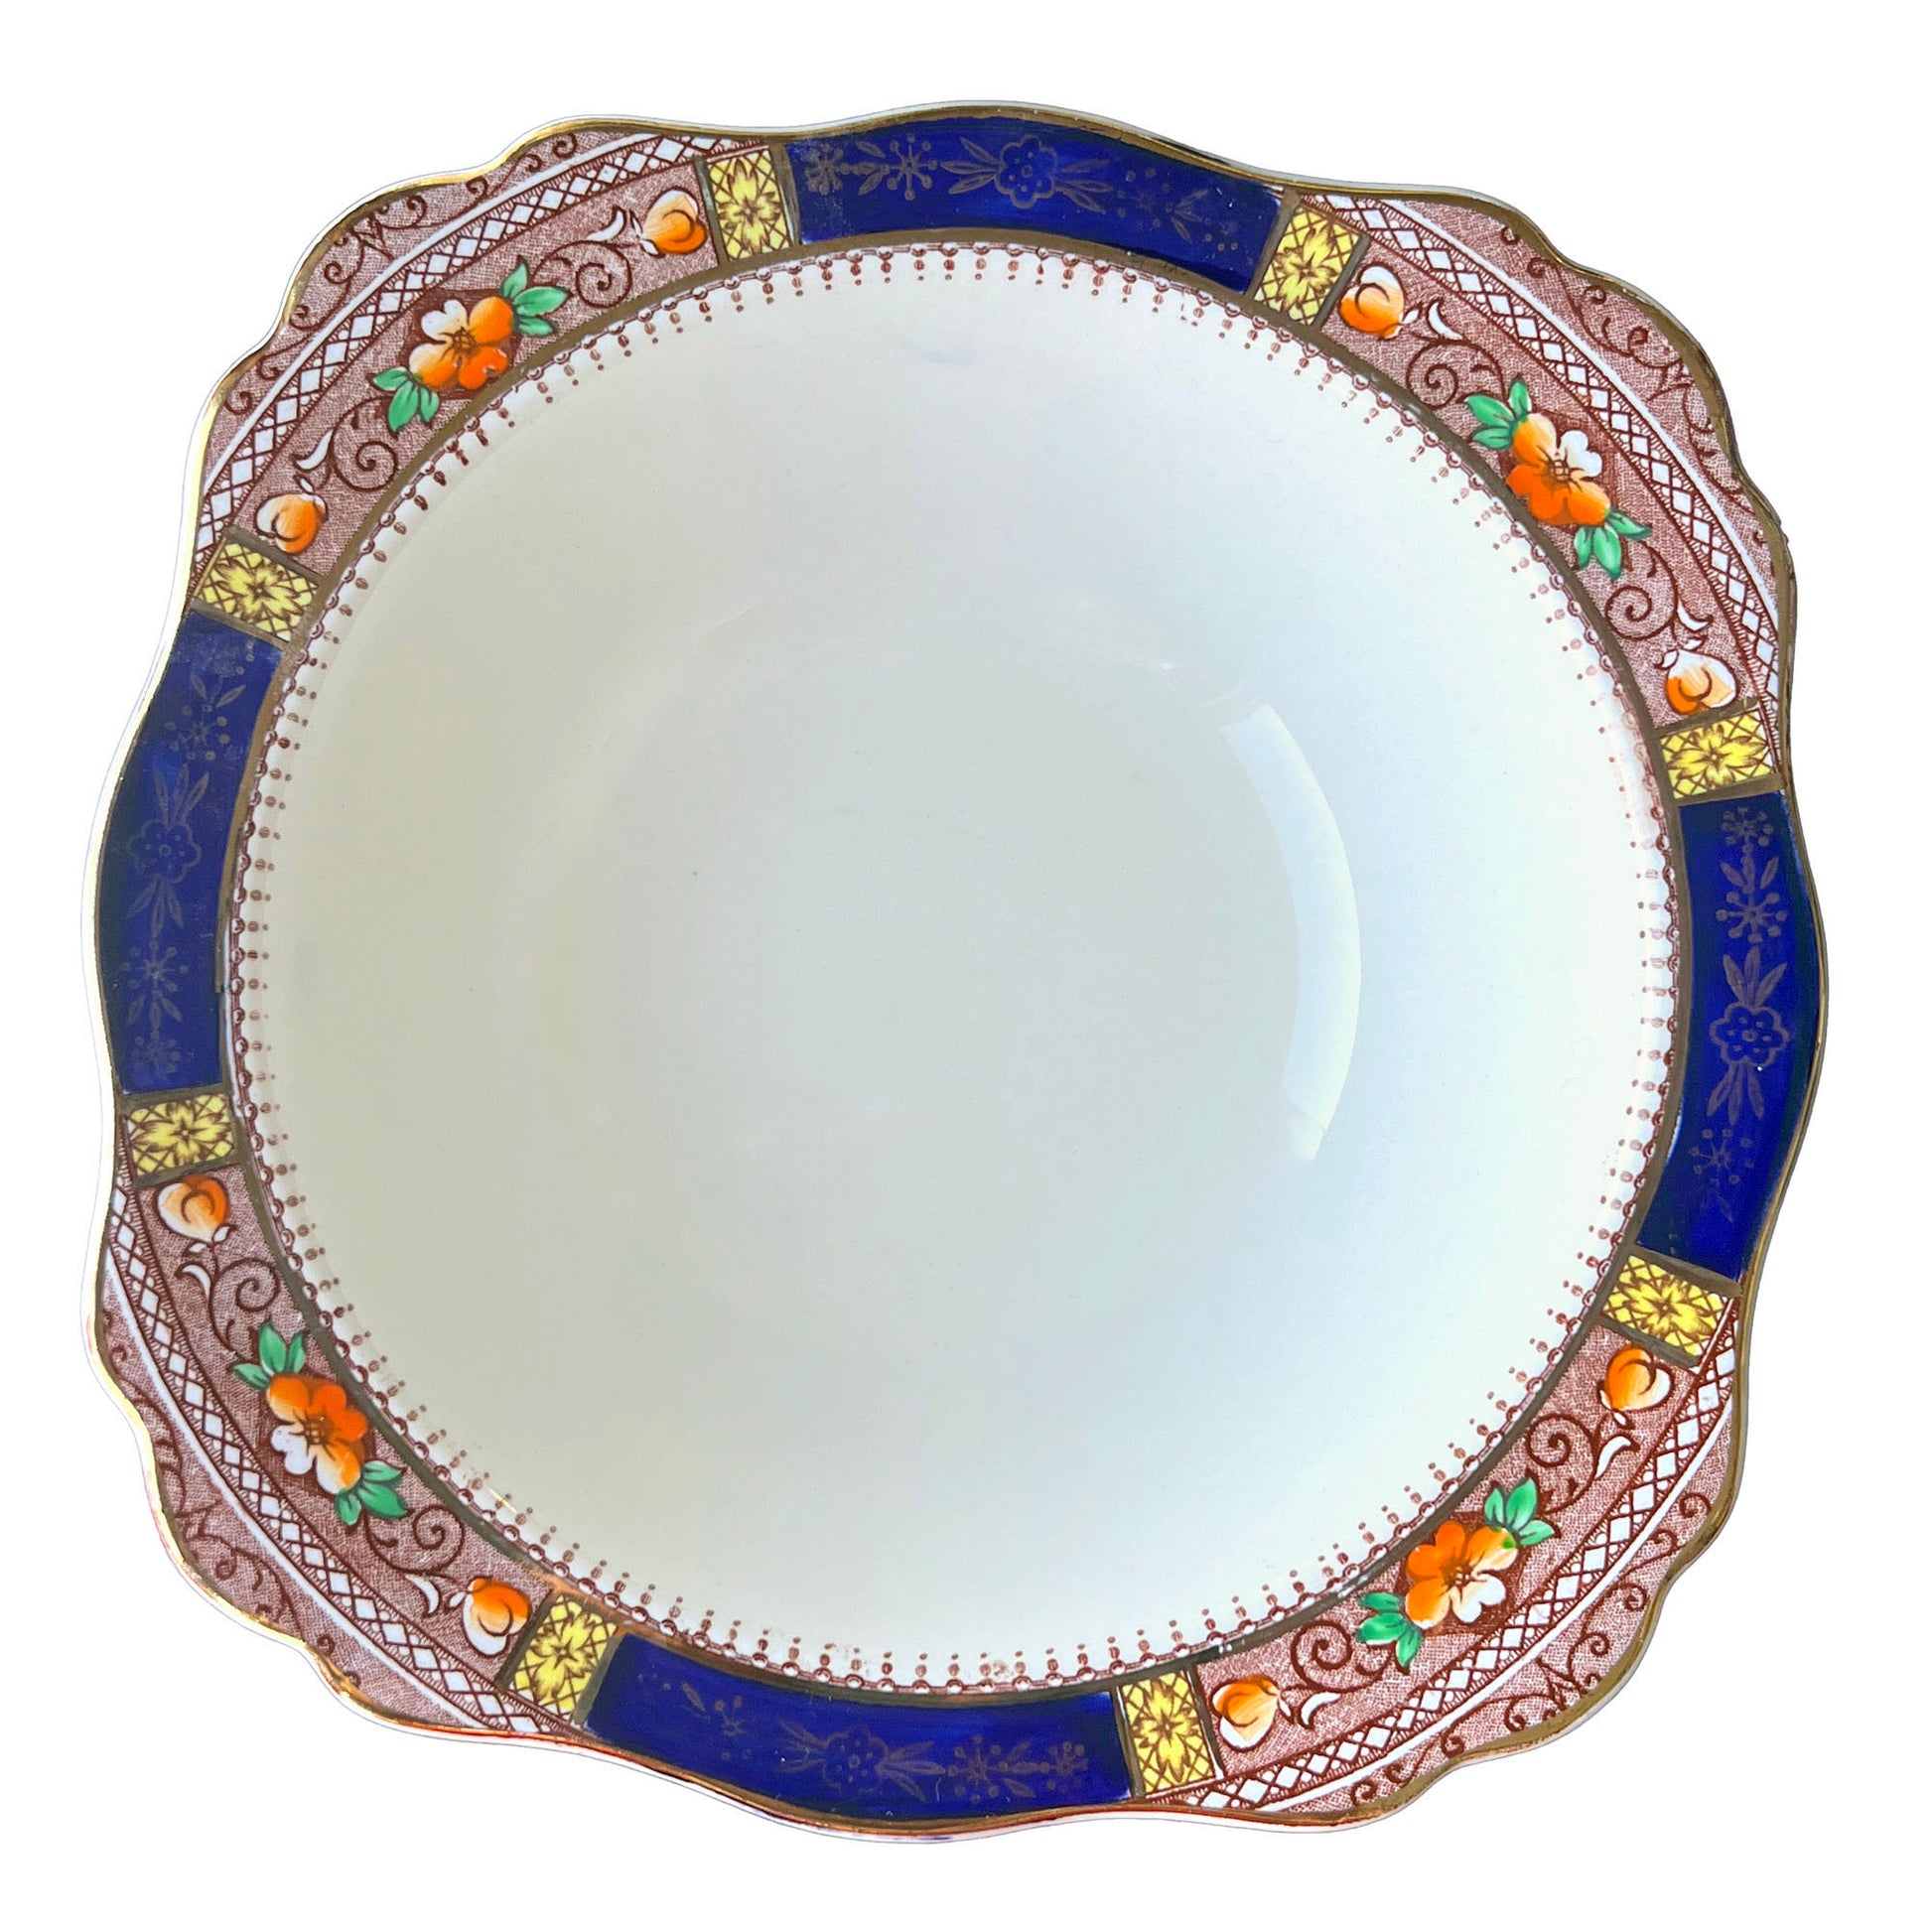 Queen-Mary-SOL-391413-byJ-_-G-Meakin-Serving-Bowl.-Shop-eBargainsAndDeals.com